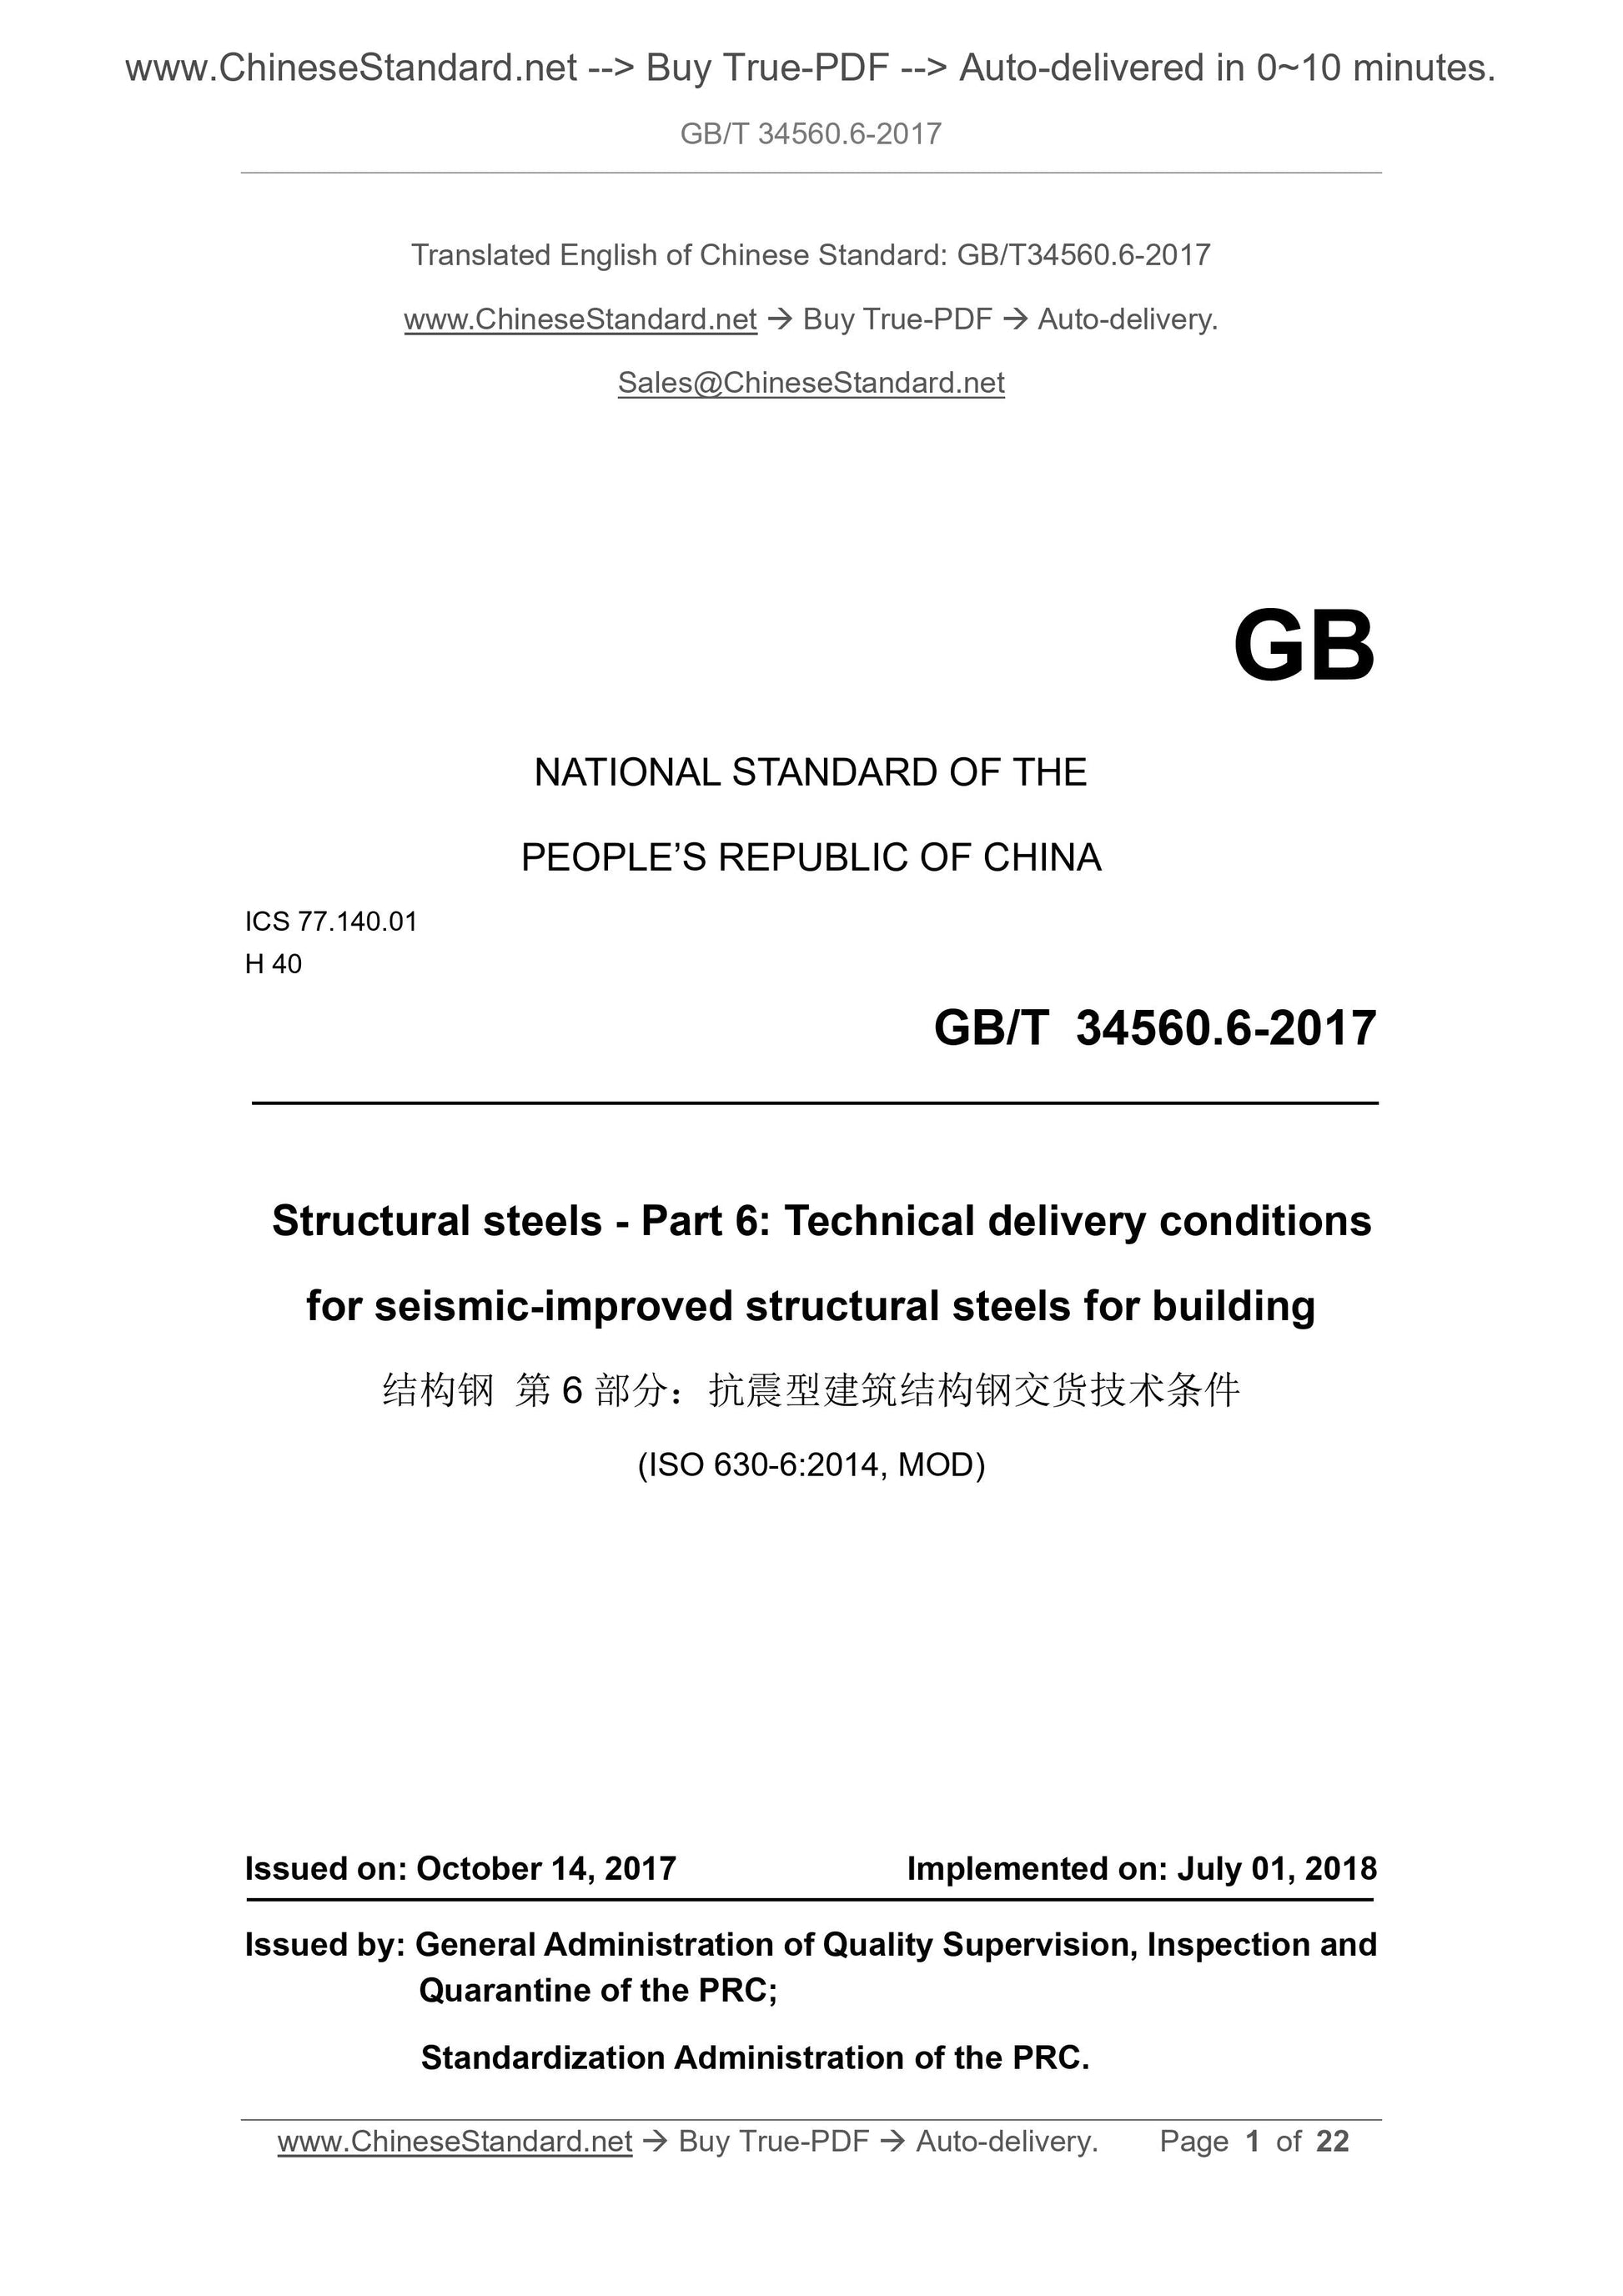 GB/T 34560.6-2017 Page 1